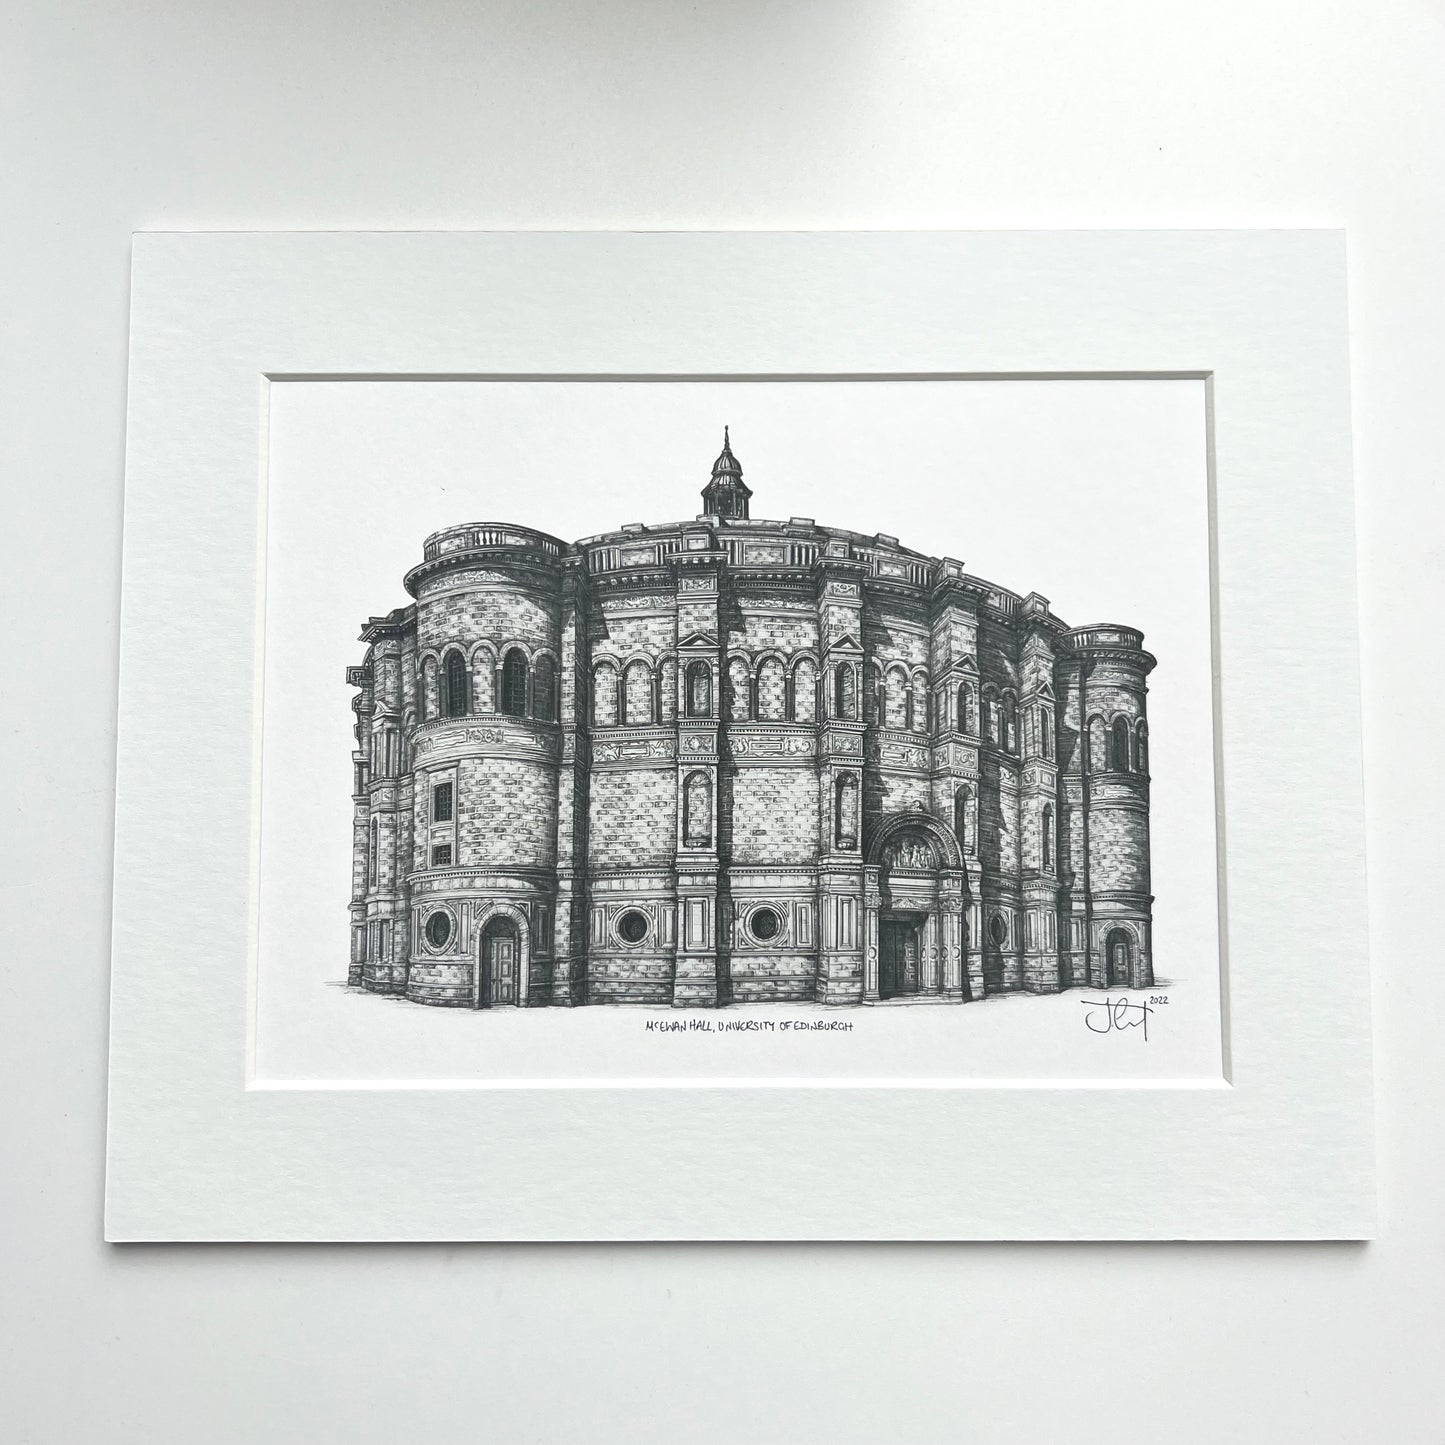 Architectural Print and Mount by Jennifer Court